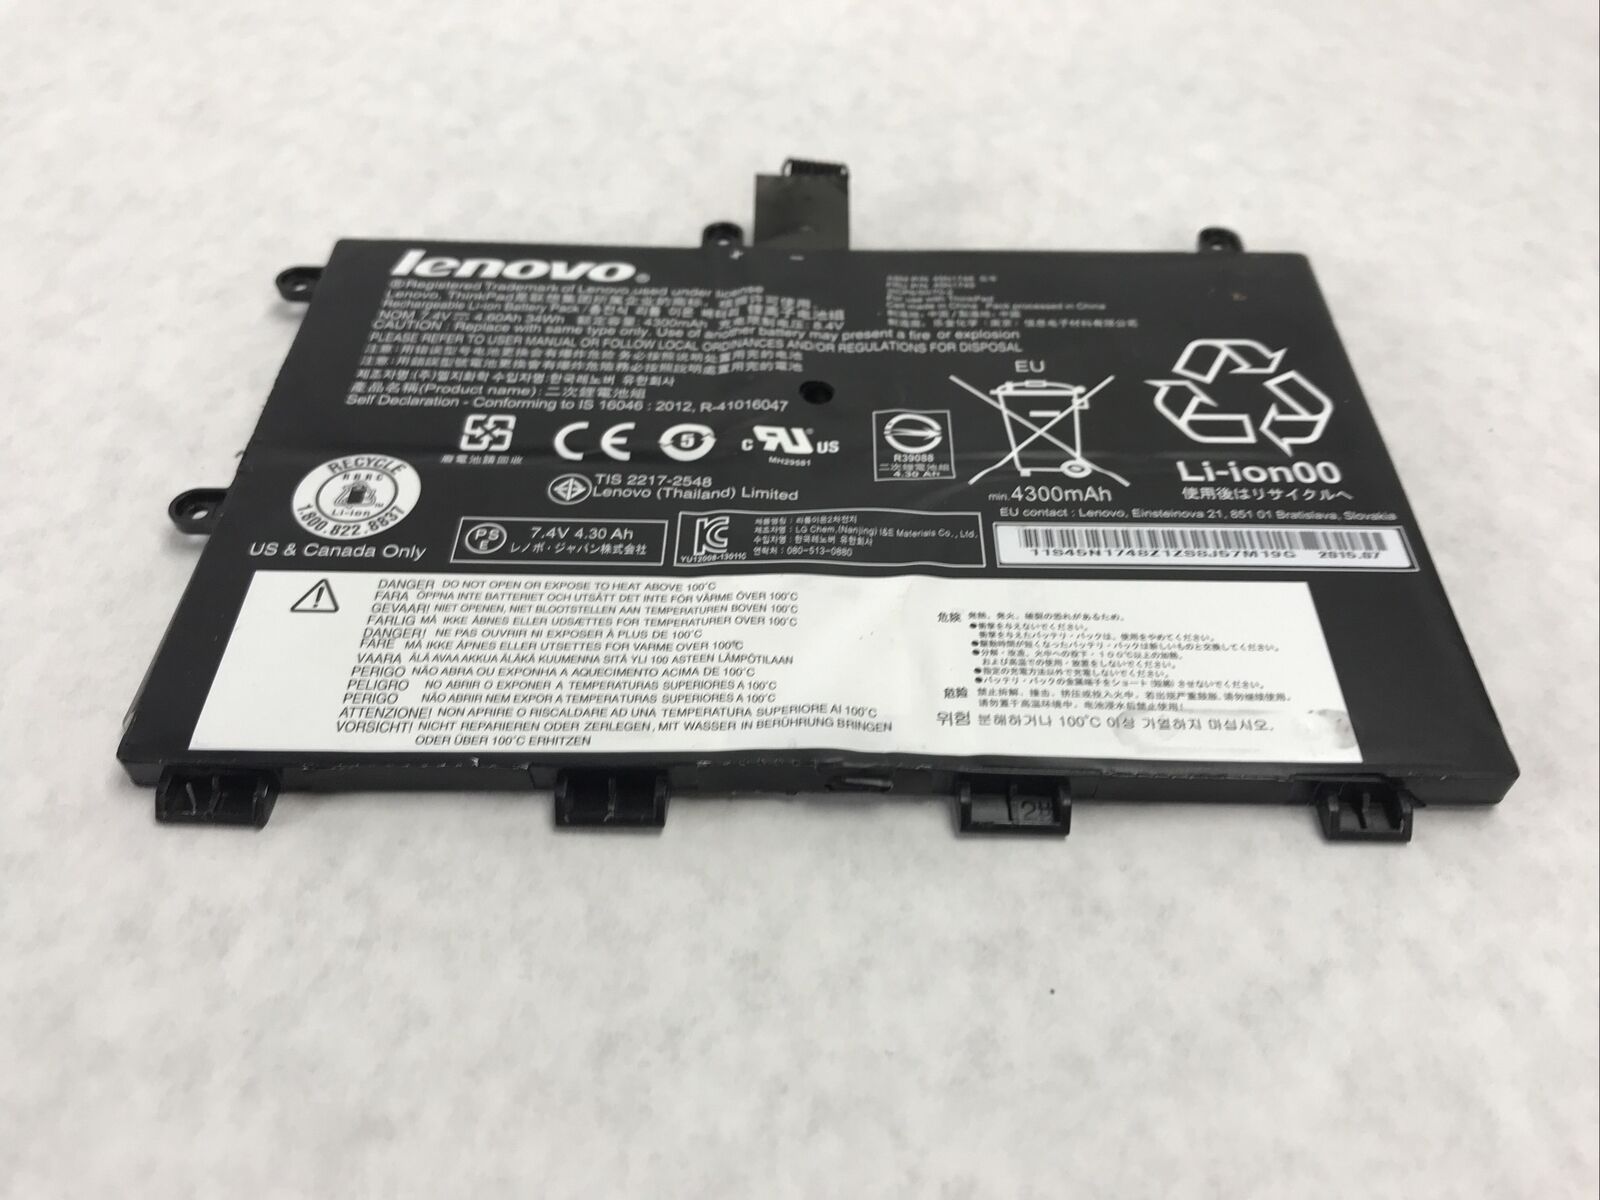 Lenovo ThinkPad 4300 mAh Rechargeable Lithium Ion Battery Pack 45N1748